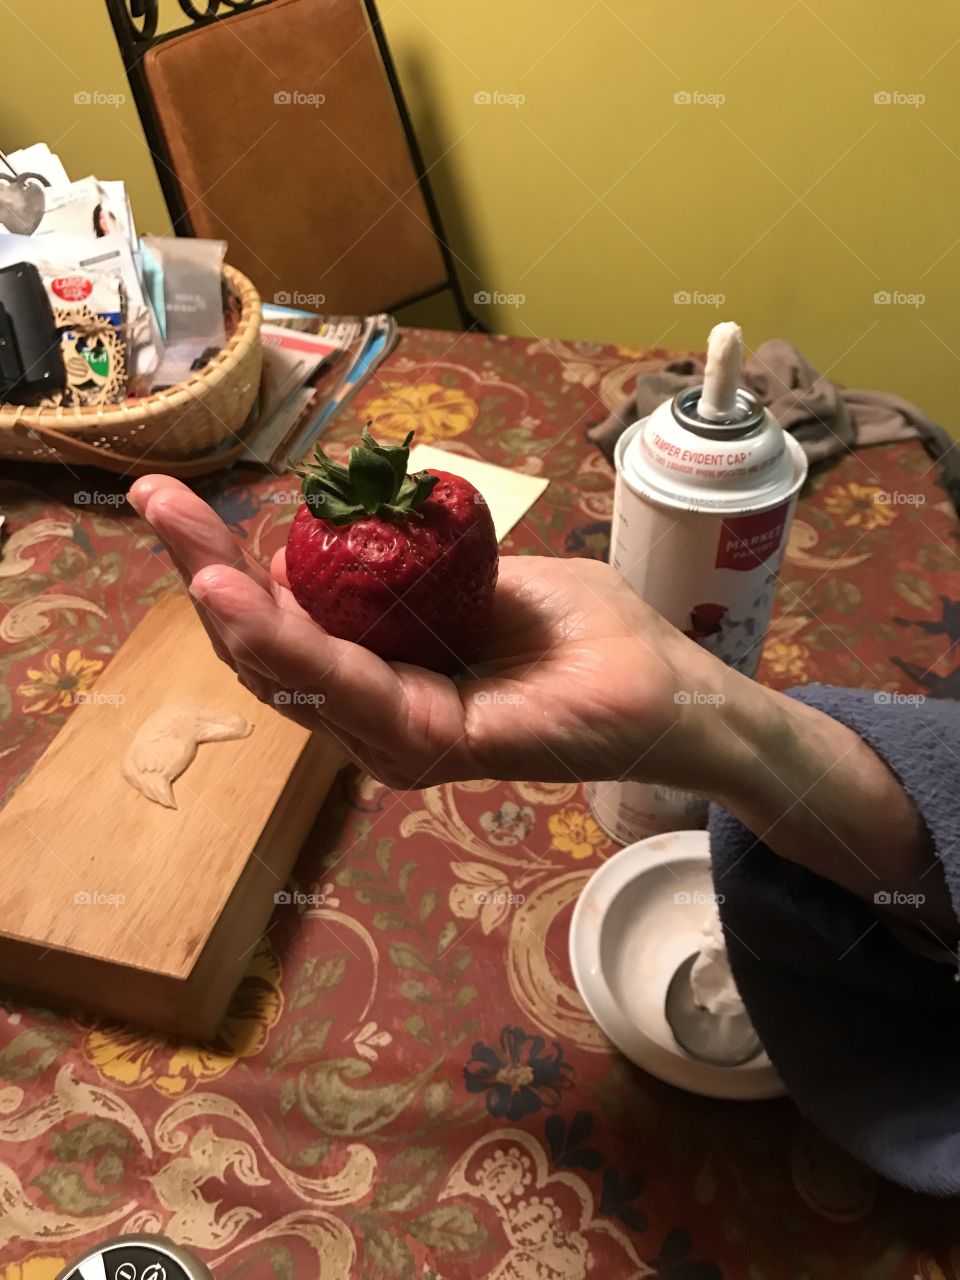 Strawberry in hand 